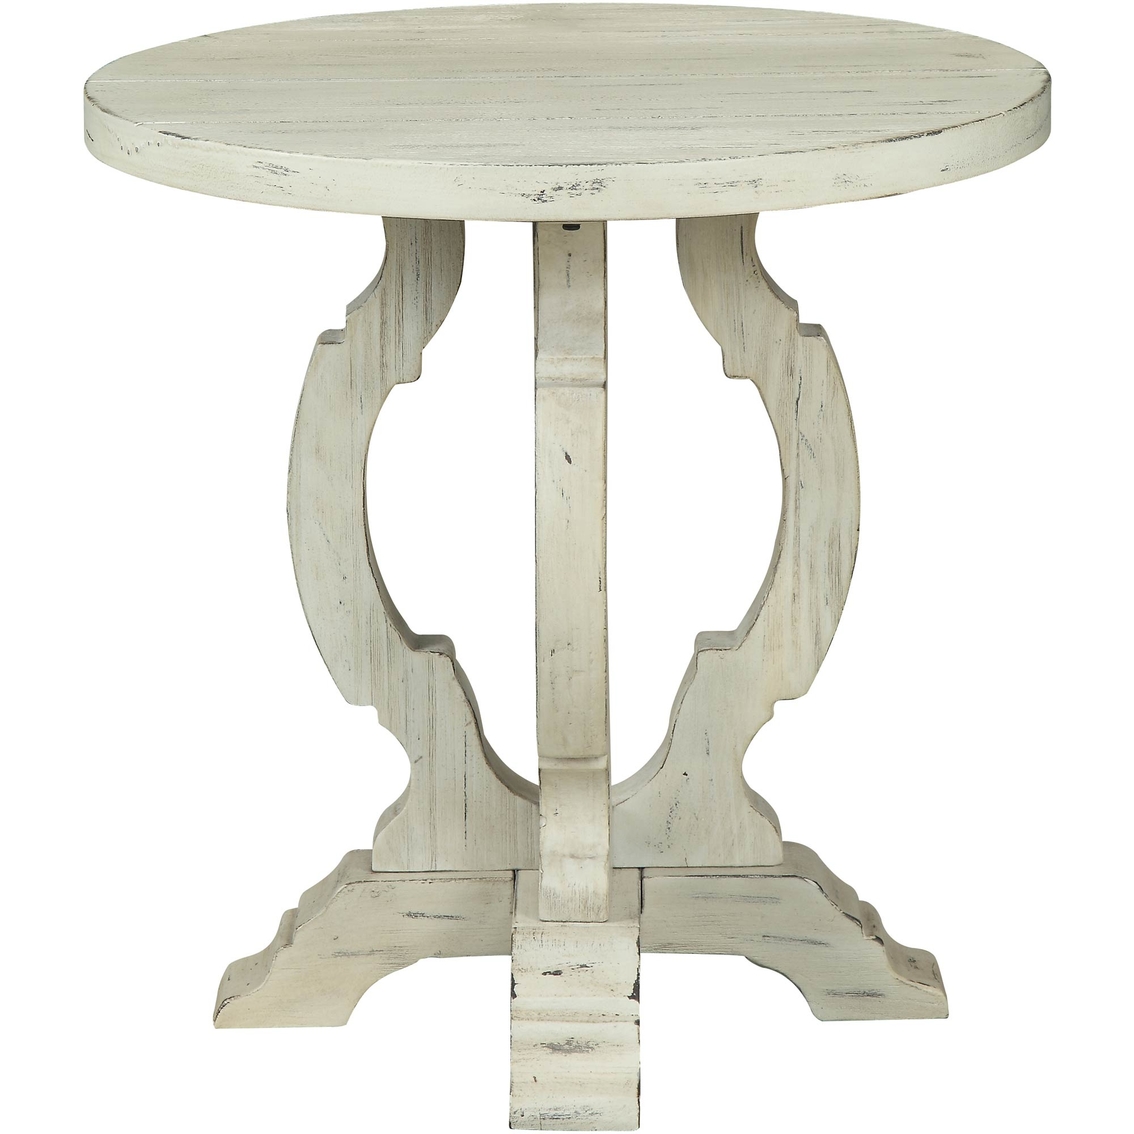 Coast to Coast Accents Orchard Park Round Accent Table - Image 2 of 4